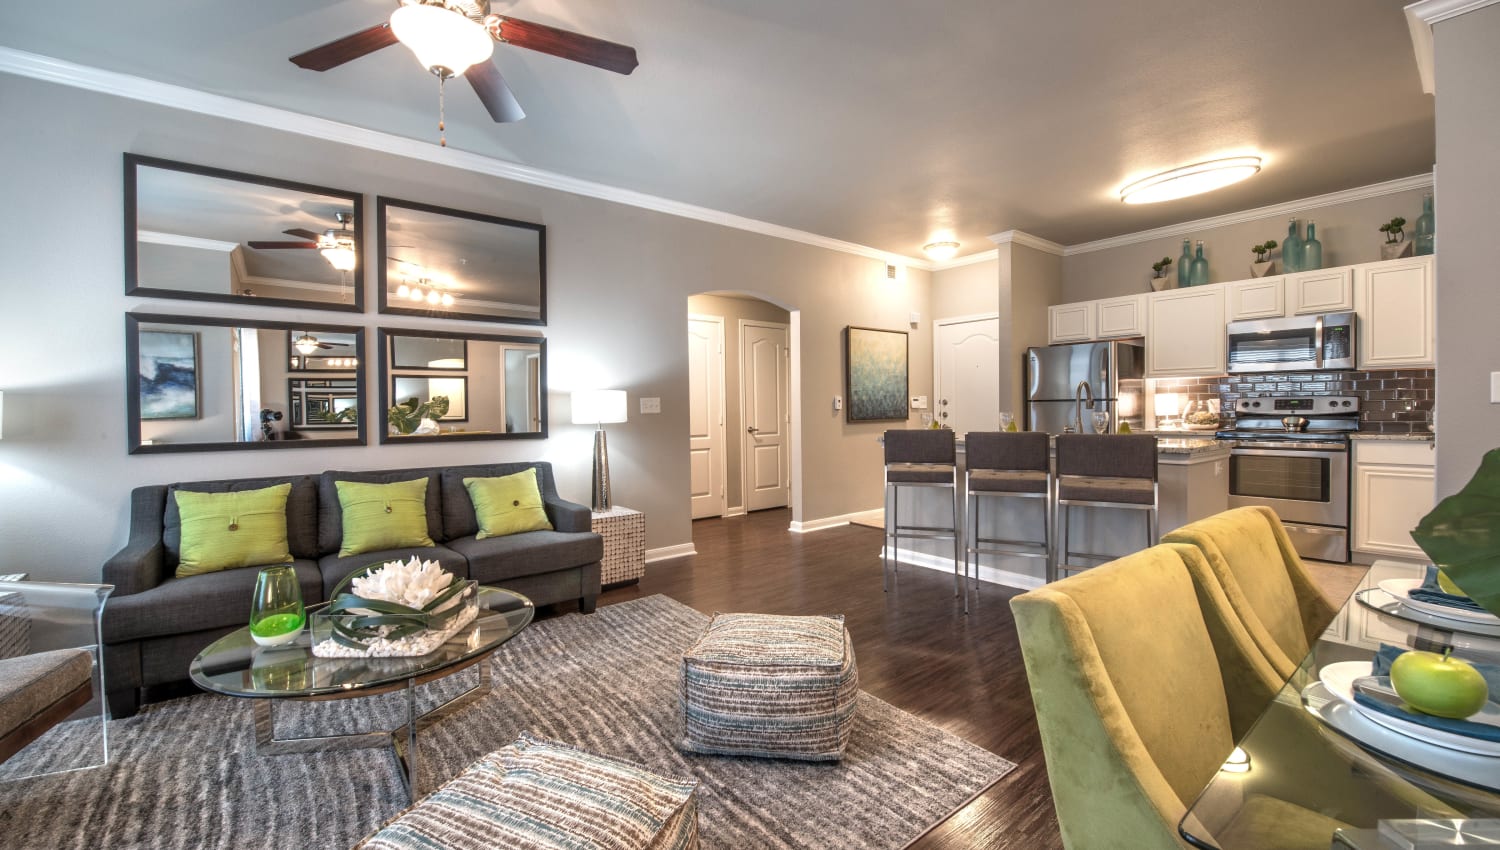 Model apartment's living space with hardwood floors and modern furnishings at Olympus Las Colinas in Irving, Texas